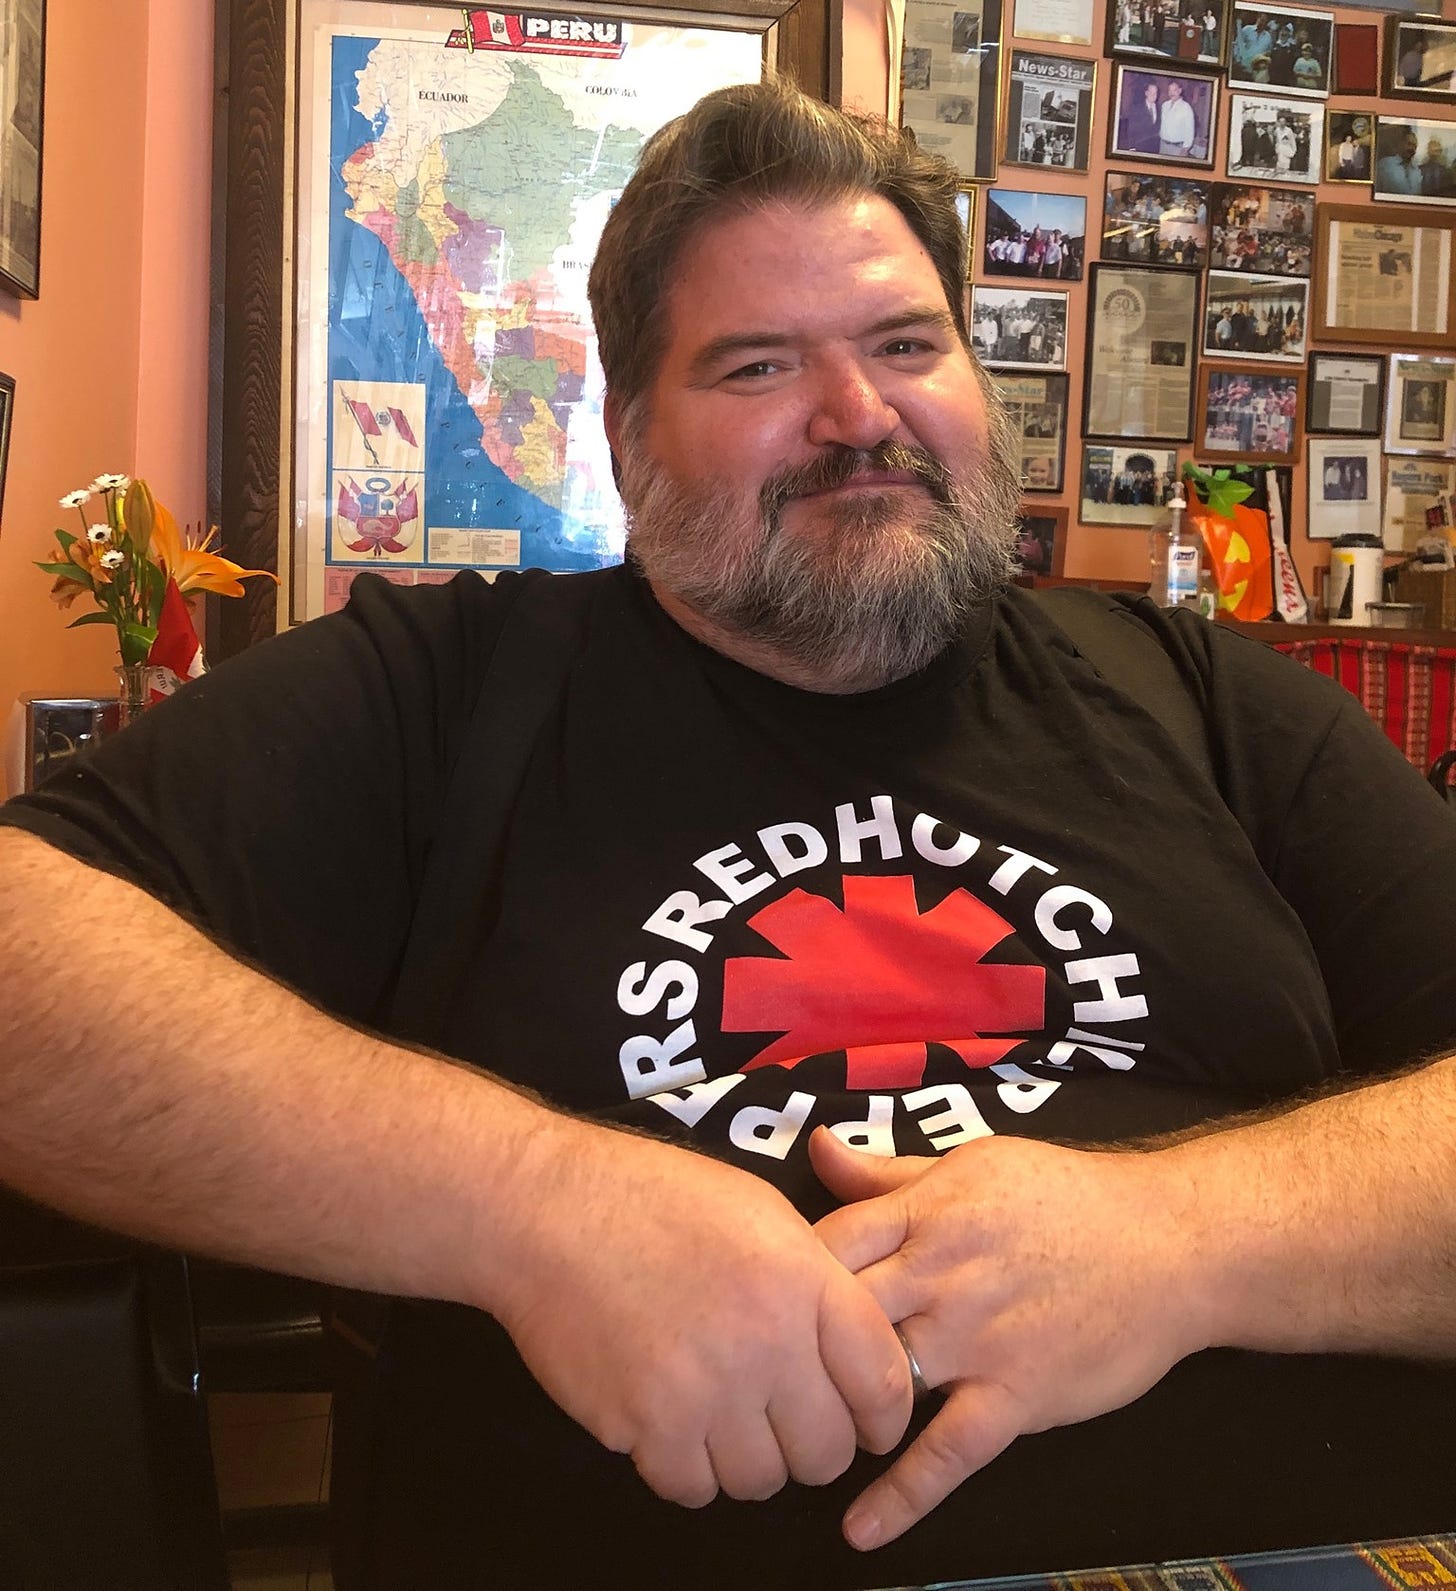 Picture of Jeremy D. Nichols, wearing a black Red Hot Chili Peppers shirt.